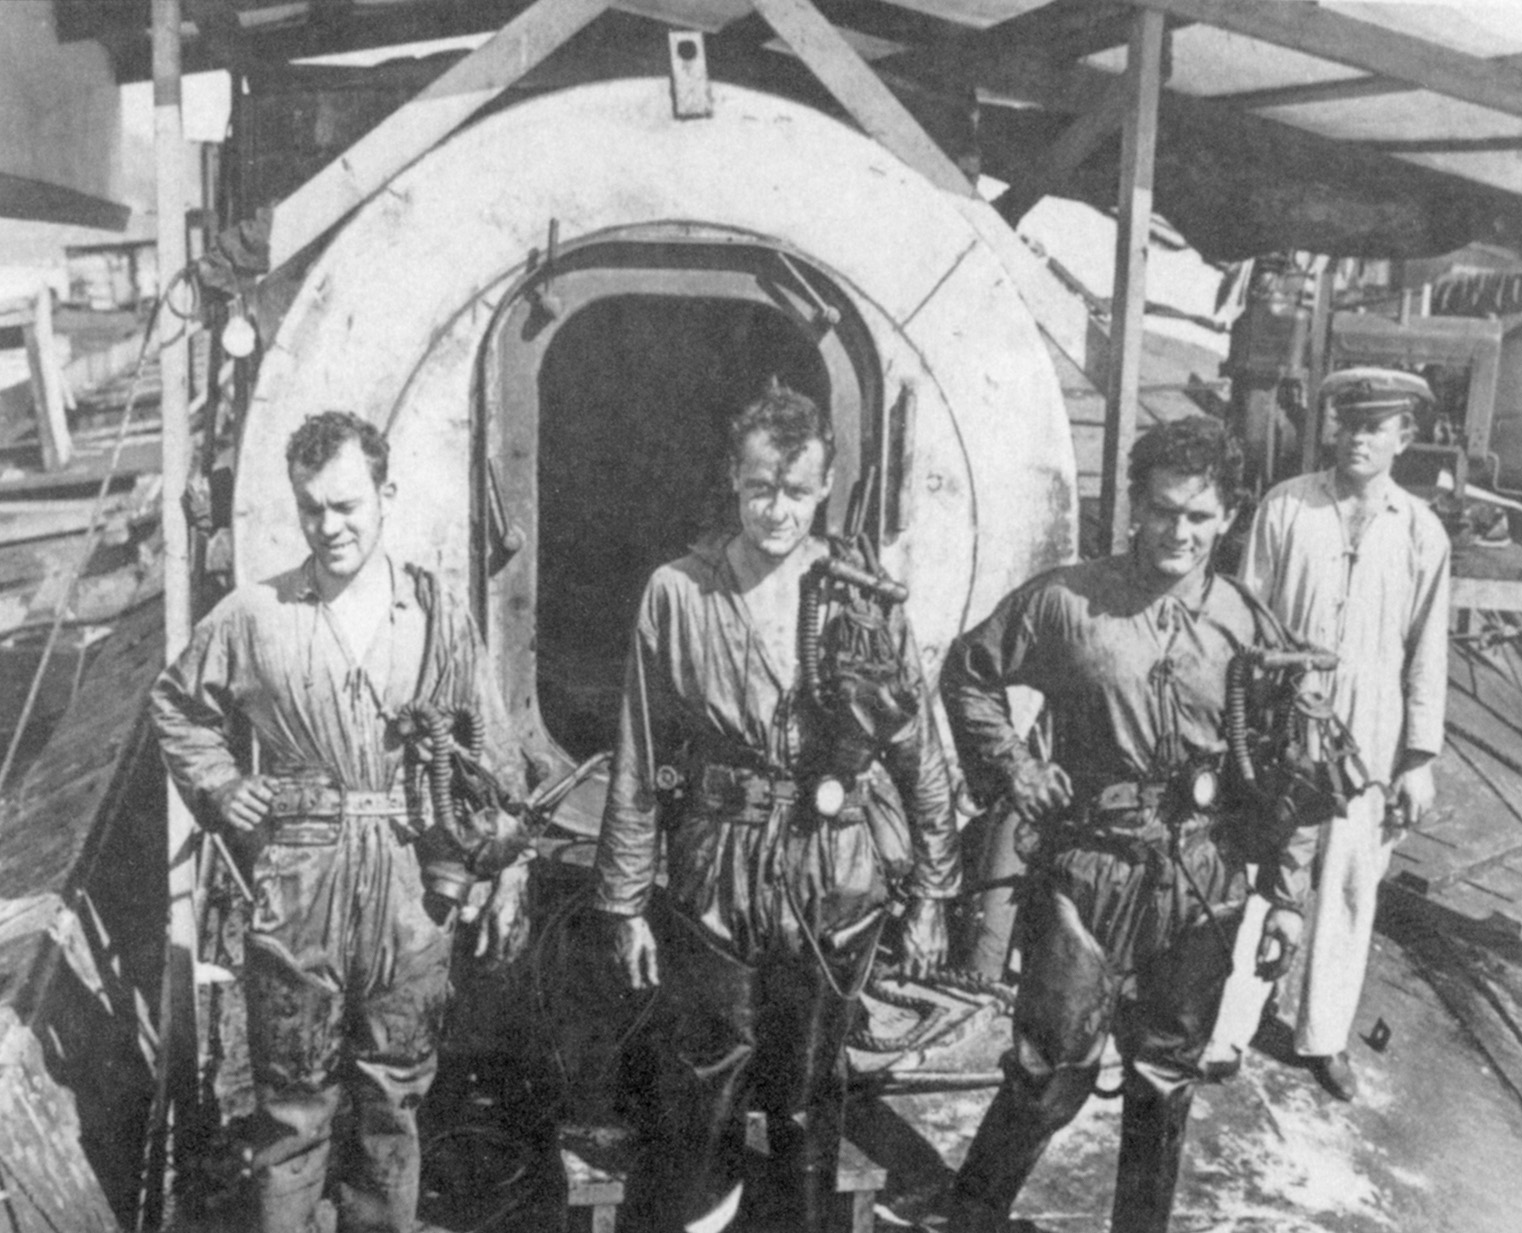 Divers pose in front of a decompression chamber during salvage efforts at Pearl Harbor.